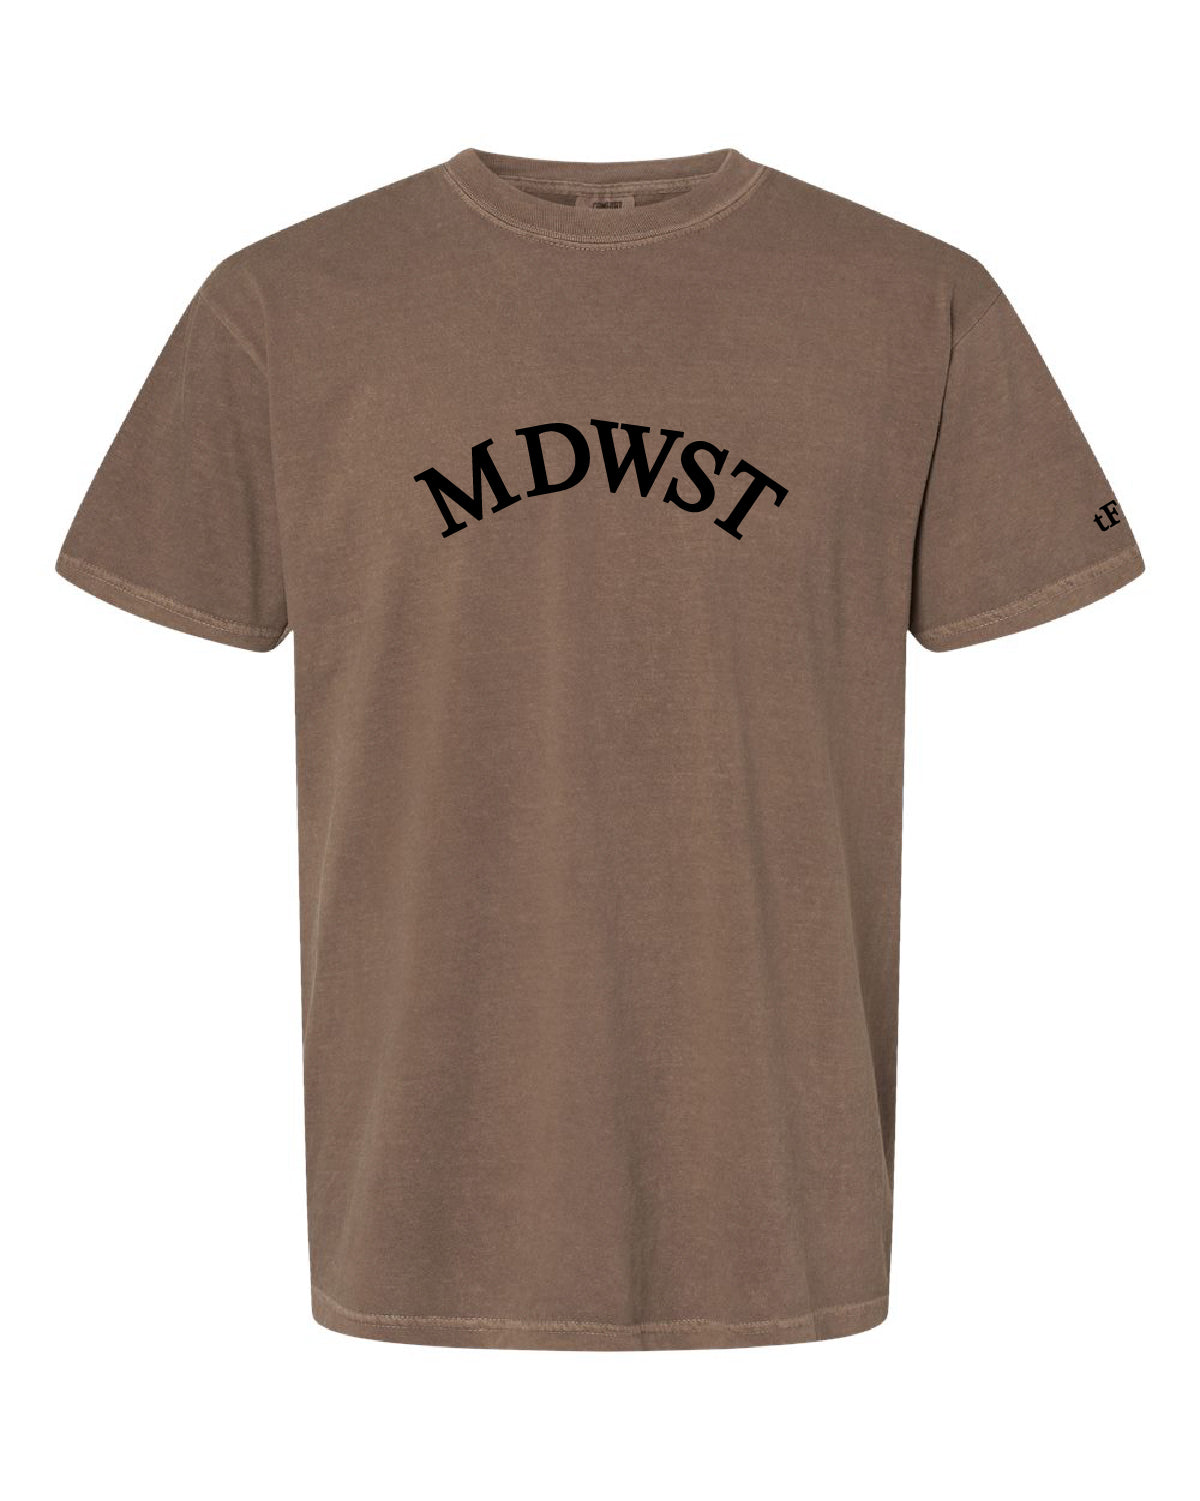 T-Shirt - Midwest Is Best